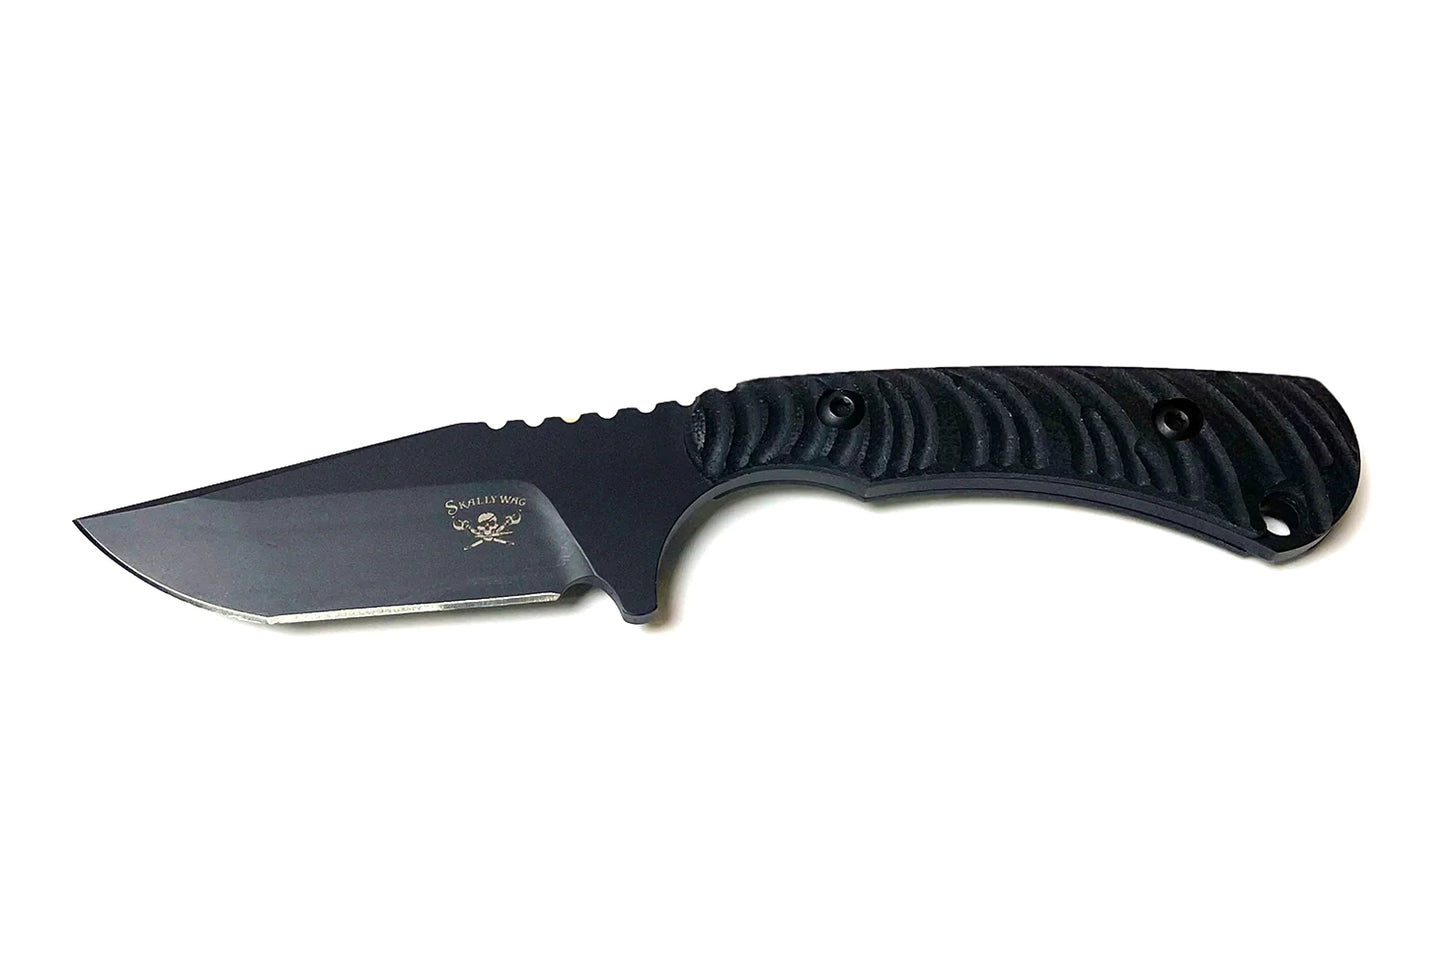 Skallywag Tactical TRIBAL Limited Edition, Black, CPM D2, Made in USA by Toor Knives